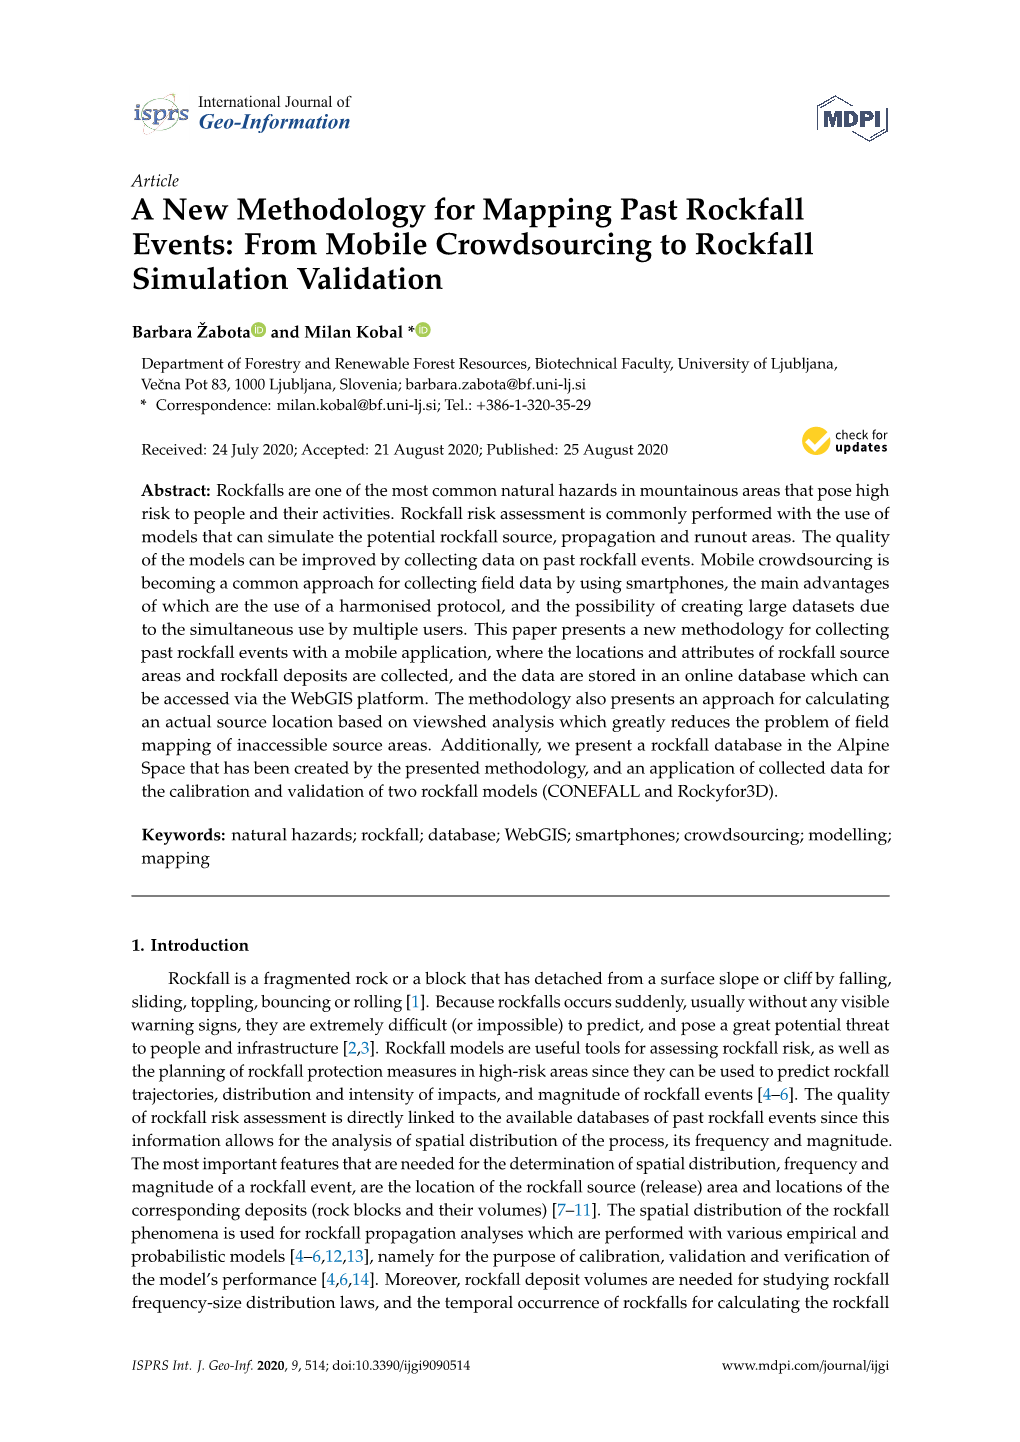 A New Methodology for Mapping Past Rockfall Events: from Mobile Crowdsourcing to Rockfall Simulation Validation